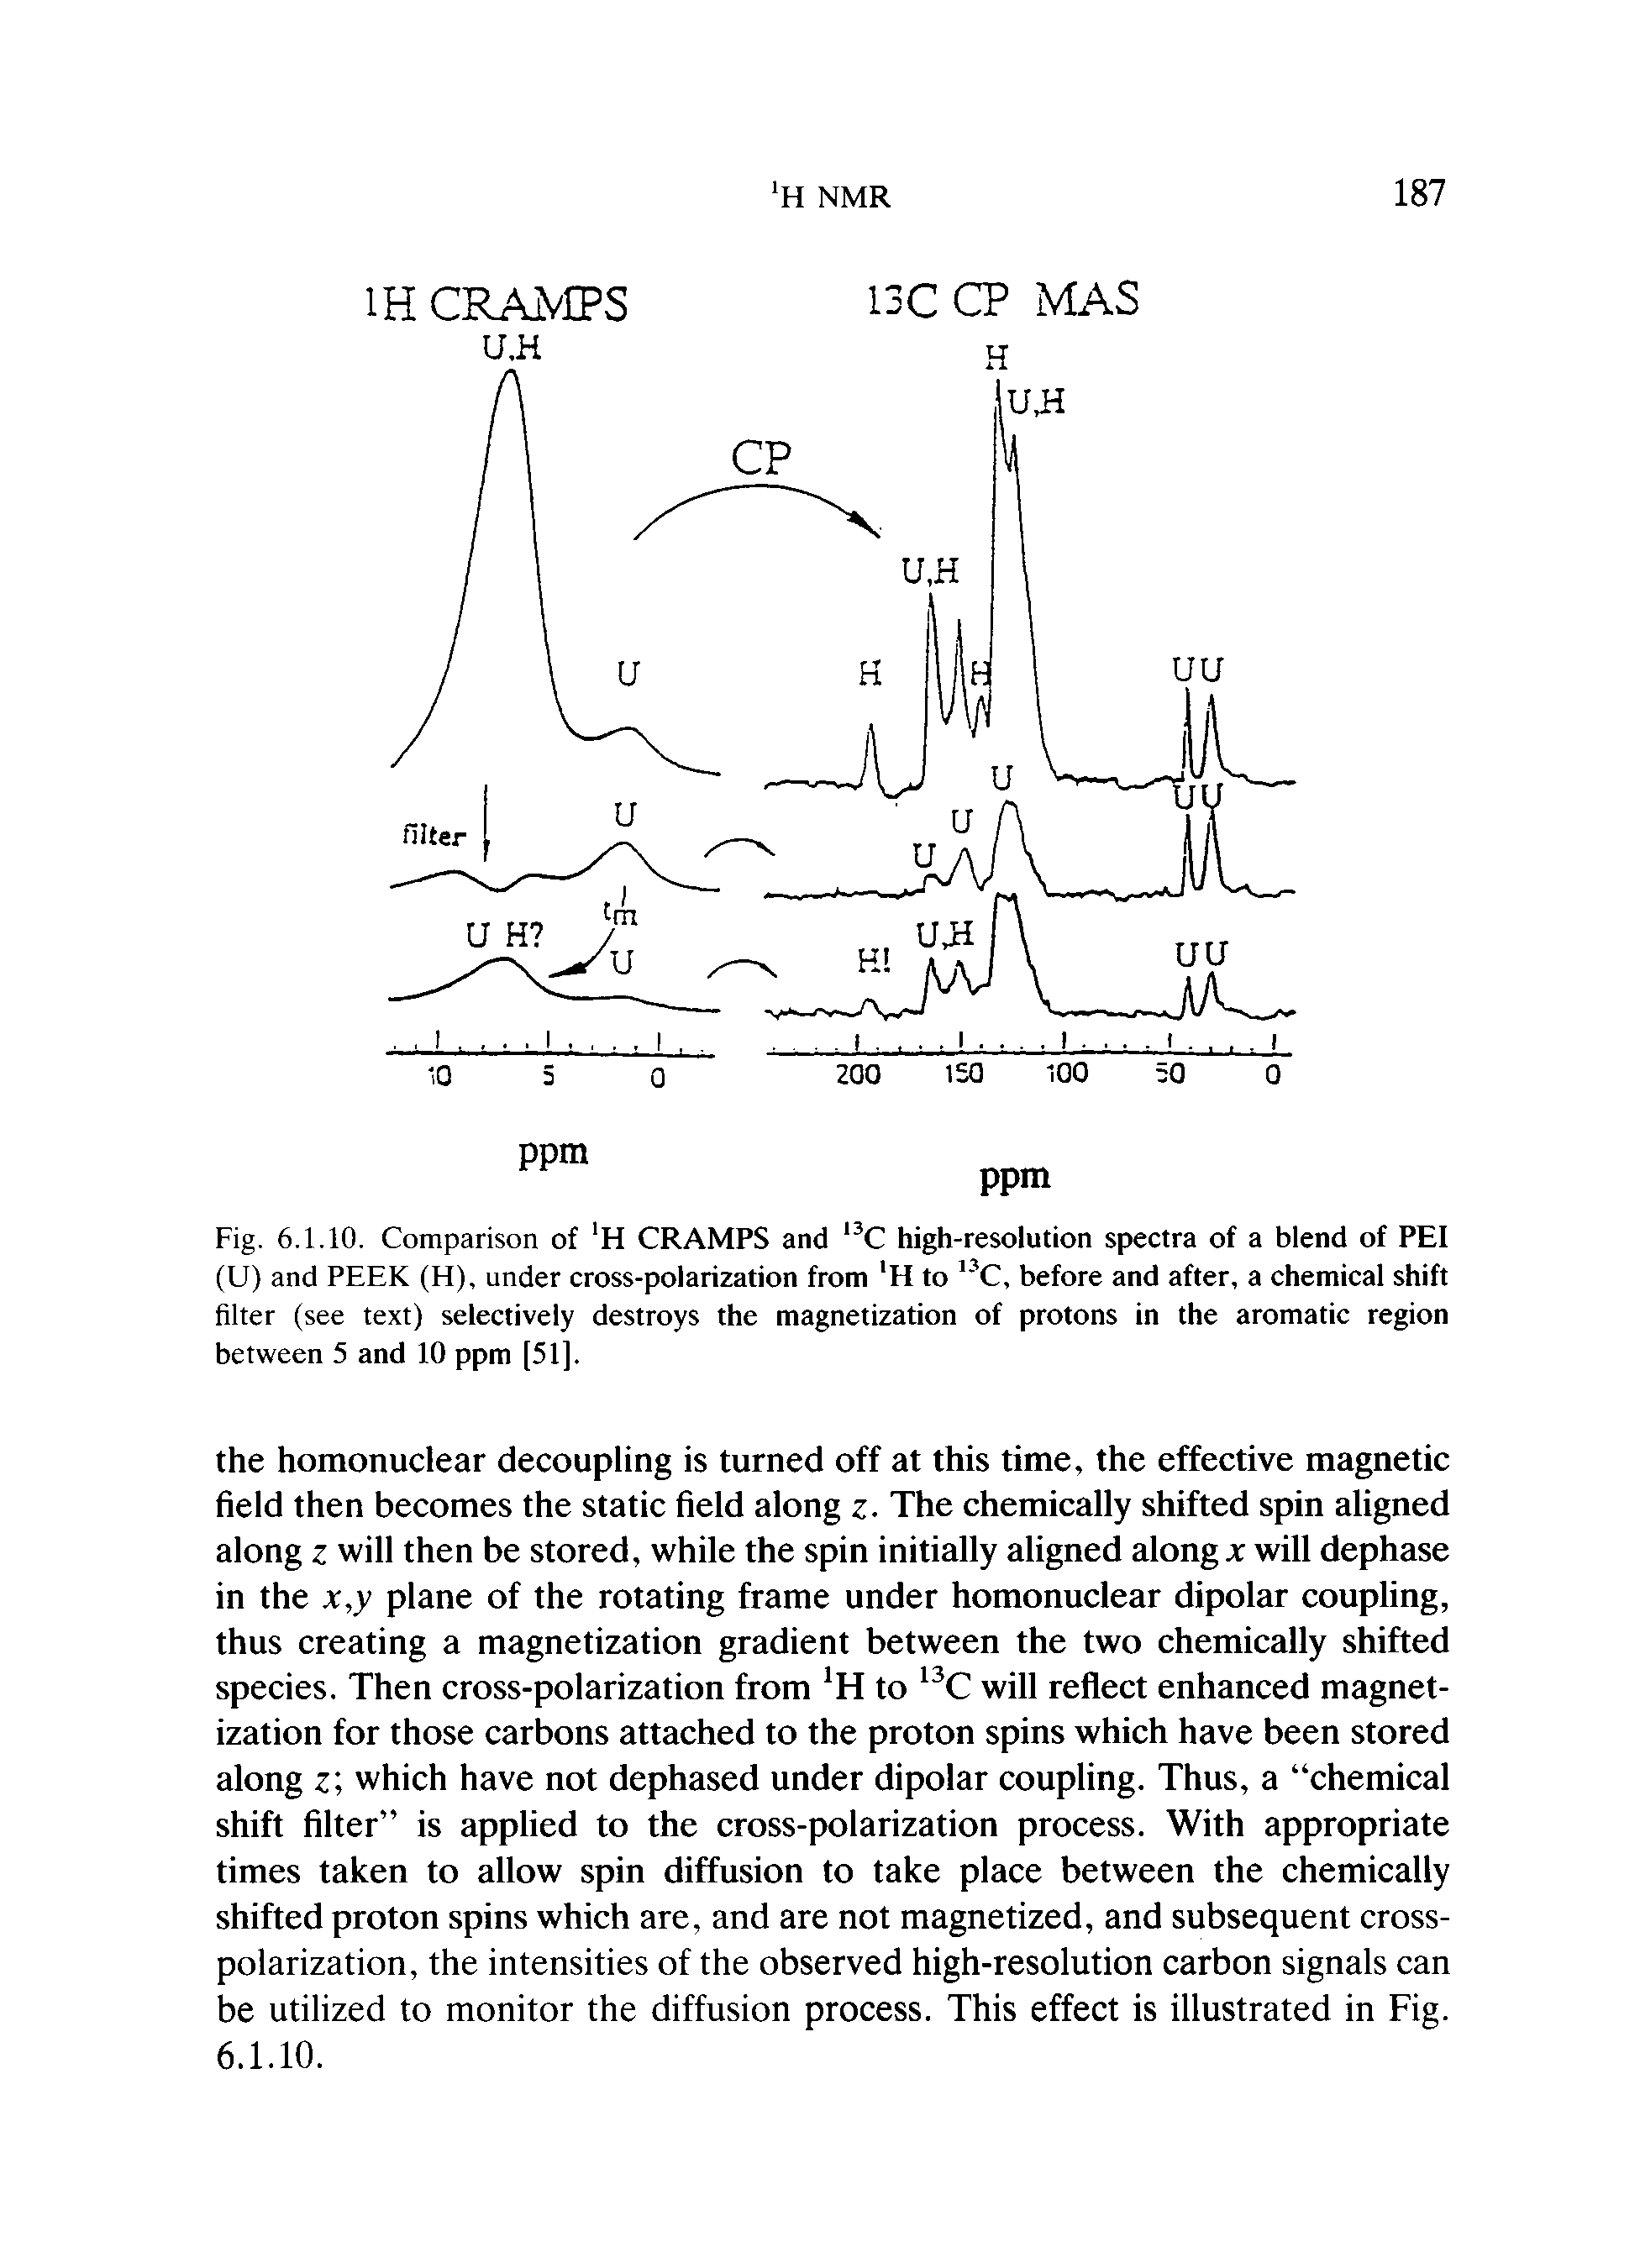 Fig. 6.1.10. Comparison of H CRAMPS and C high-resolution spectra of a blend of PEI (U) and PEEK (FI), under cross-polarization from H to " C, before and after, a chemical shift filter (see text) selectively destroys the magnetization of protons in the aromatic region between 5 and 10 ppm [51].